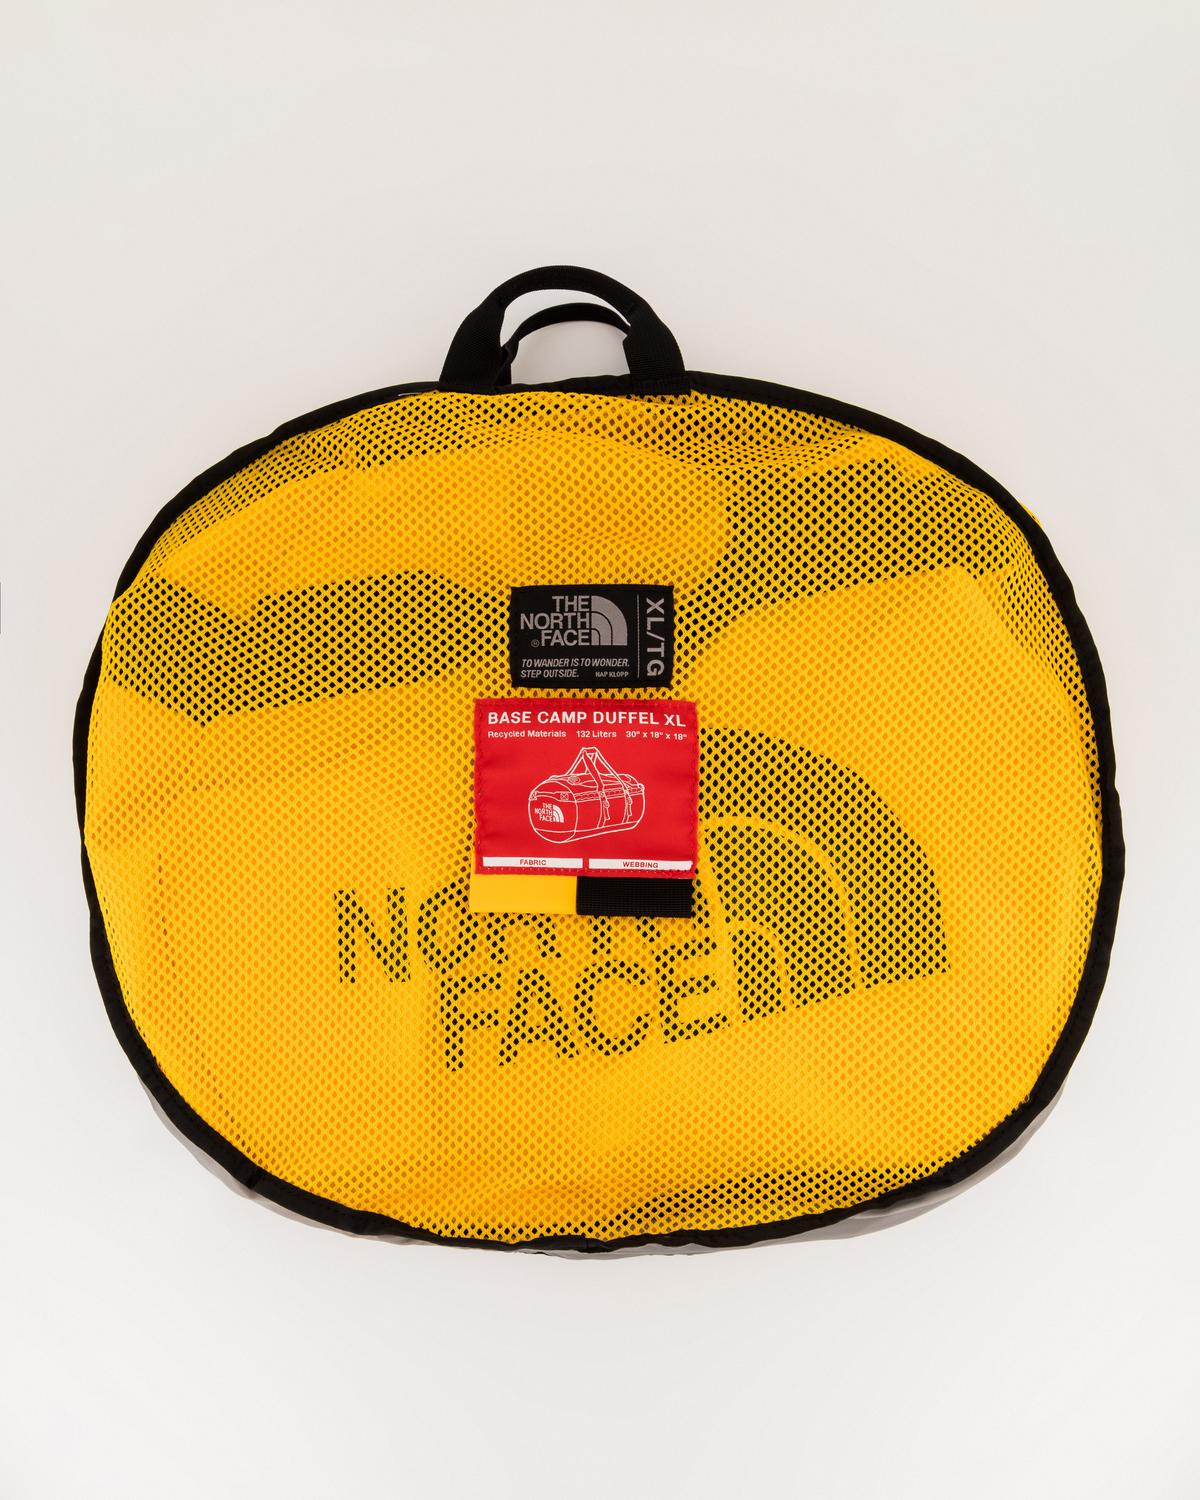 The North Face Extra-Large Base Camp Duffel Bag -  Yellow